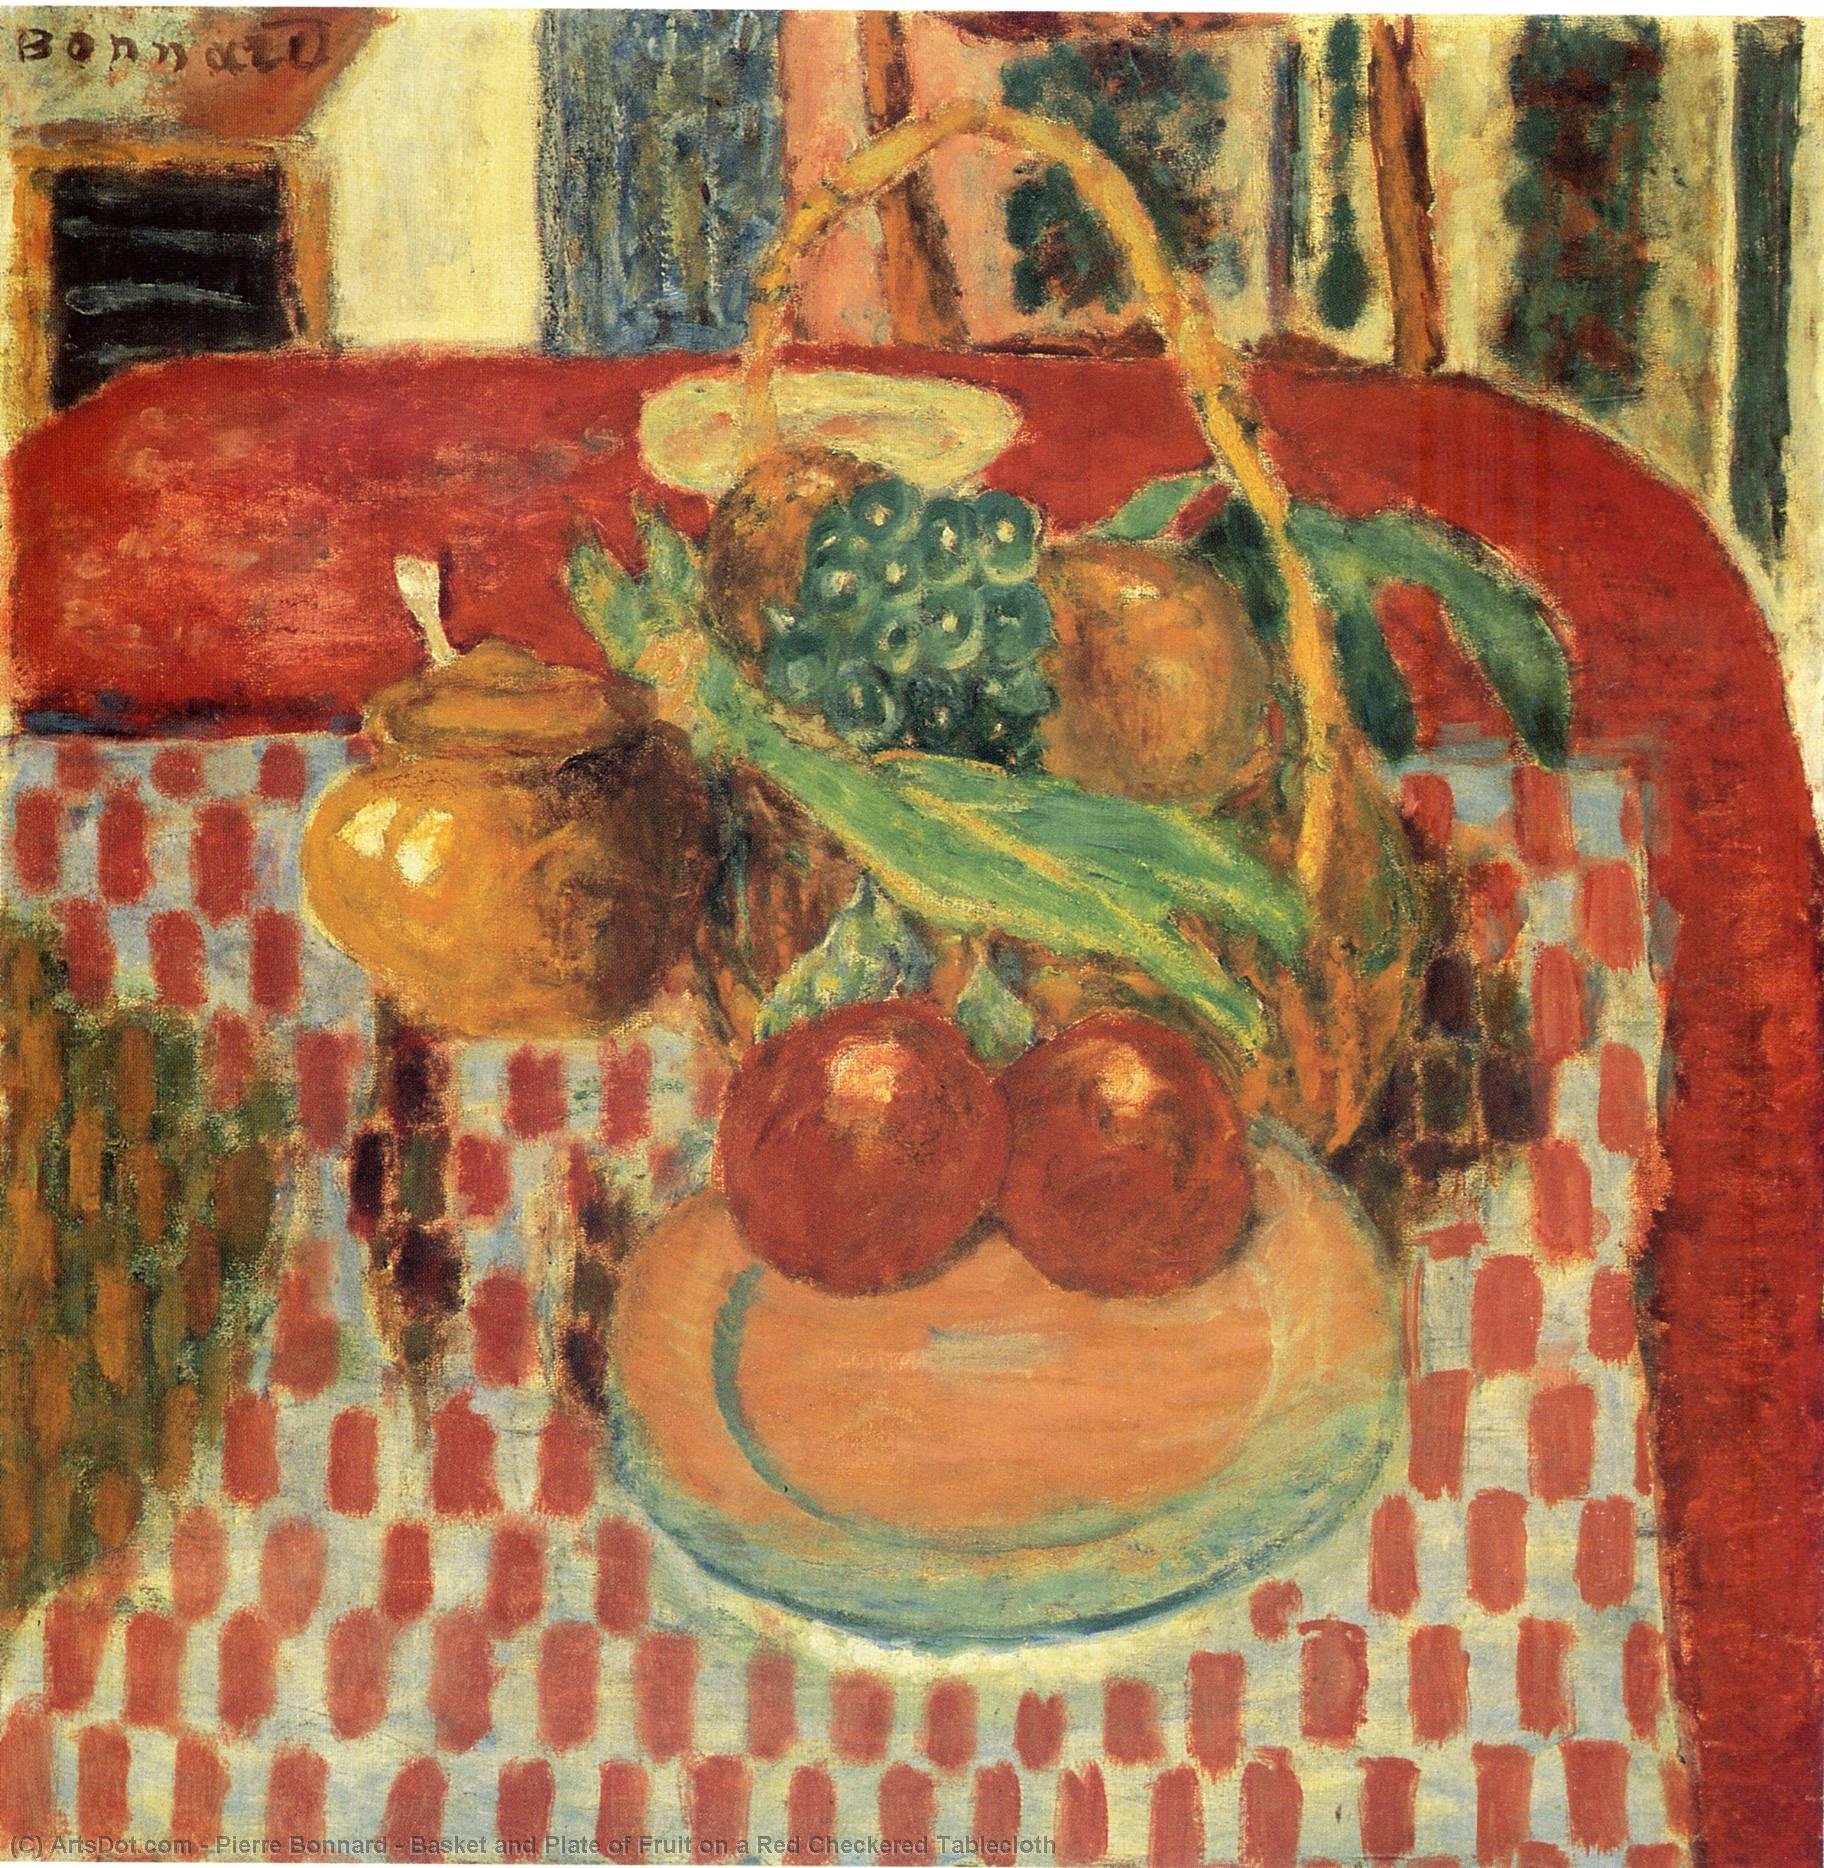 WikiOO.org - Encyclopedia of Fine Arts - Schilderen, Artwork Pierre Bonnard - Basket and Plate of Fruit on a Red Checkered Tablecloth